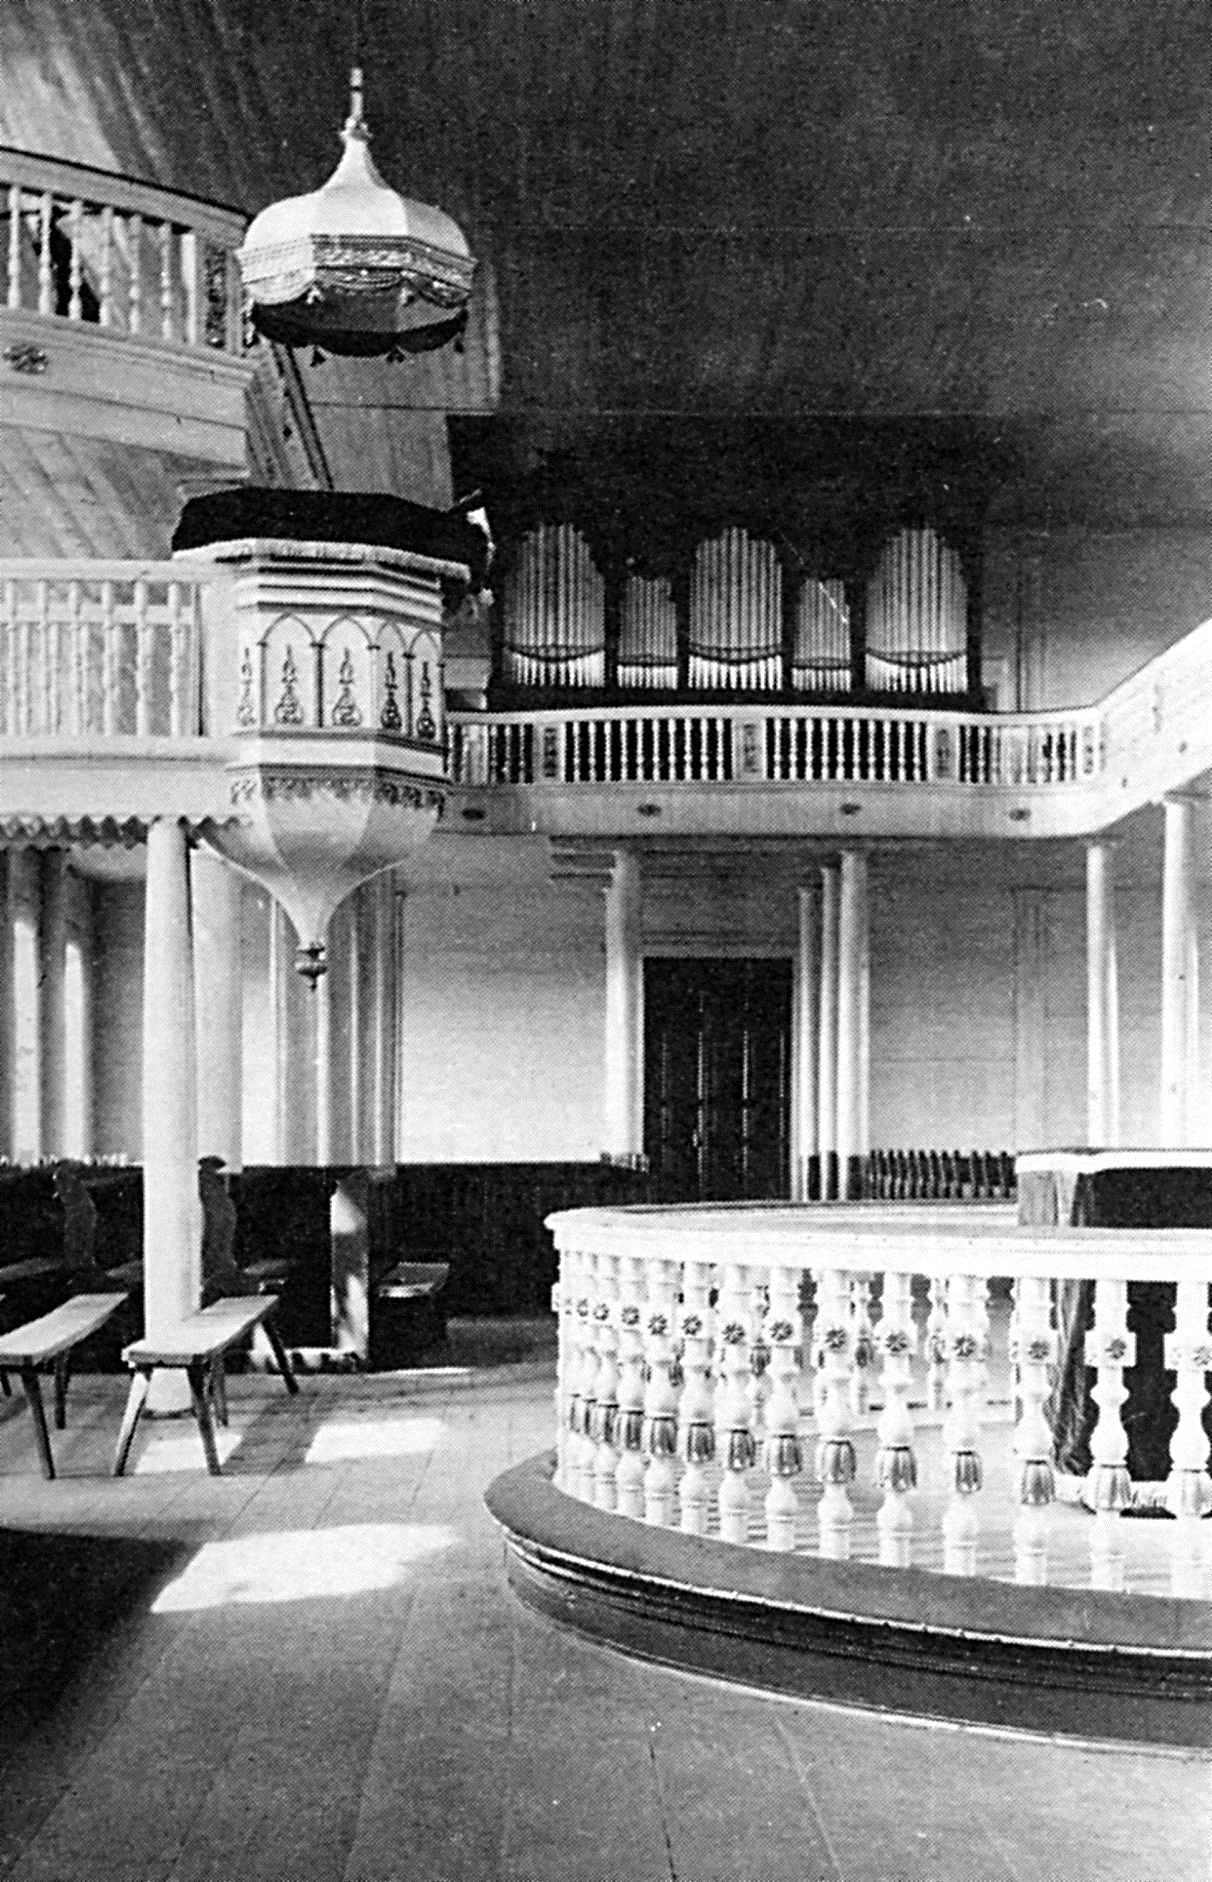 Norka Church interior showing the organ at the back of the sanctuary (1912). Source: AHSGR Journal, Summer 1985.